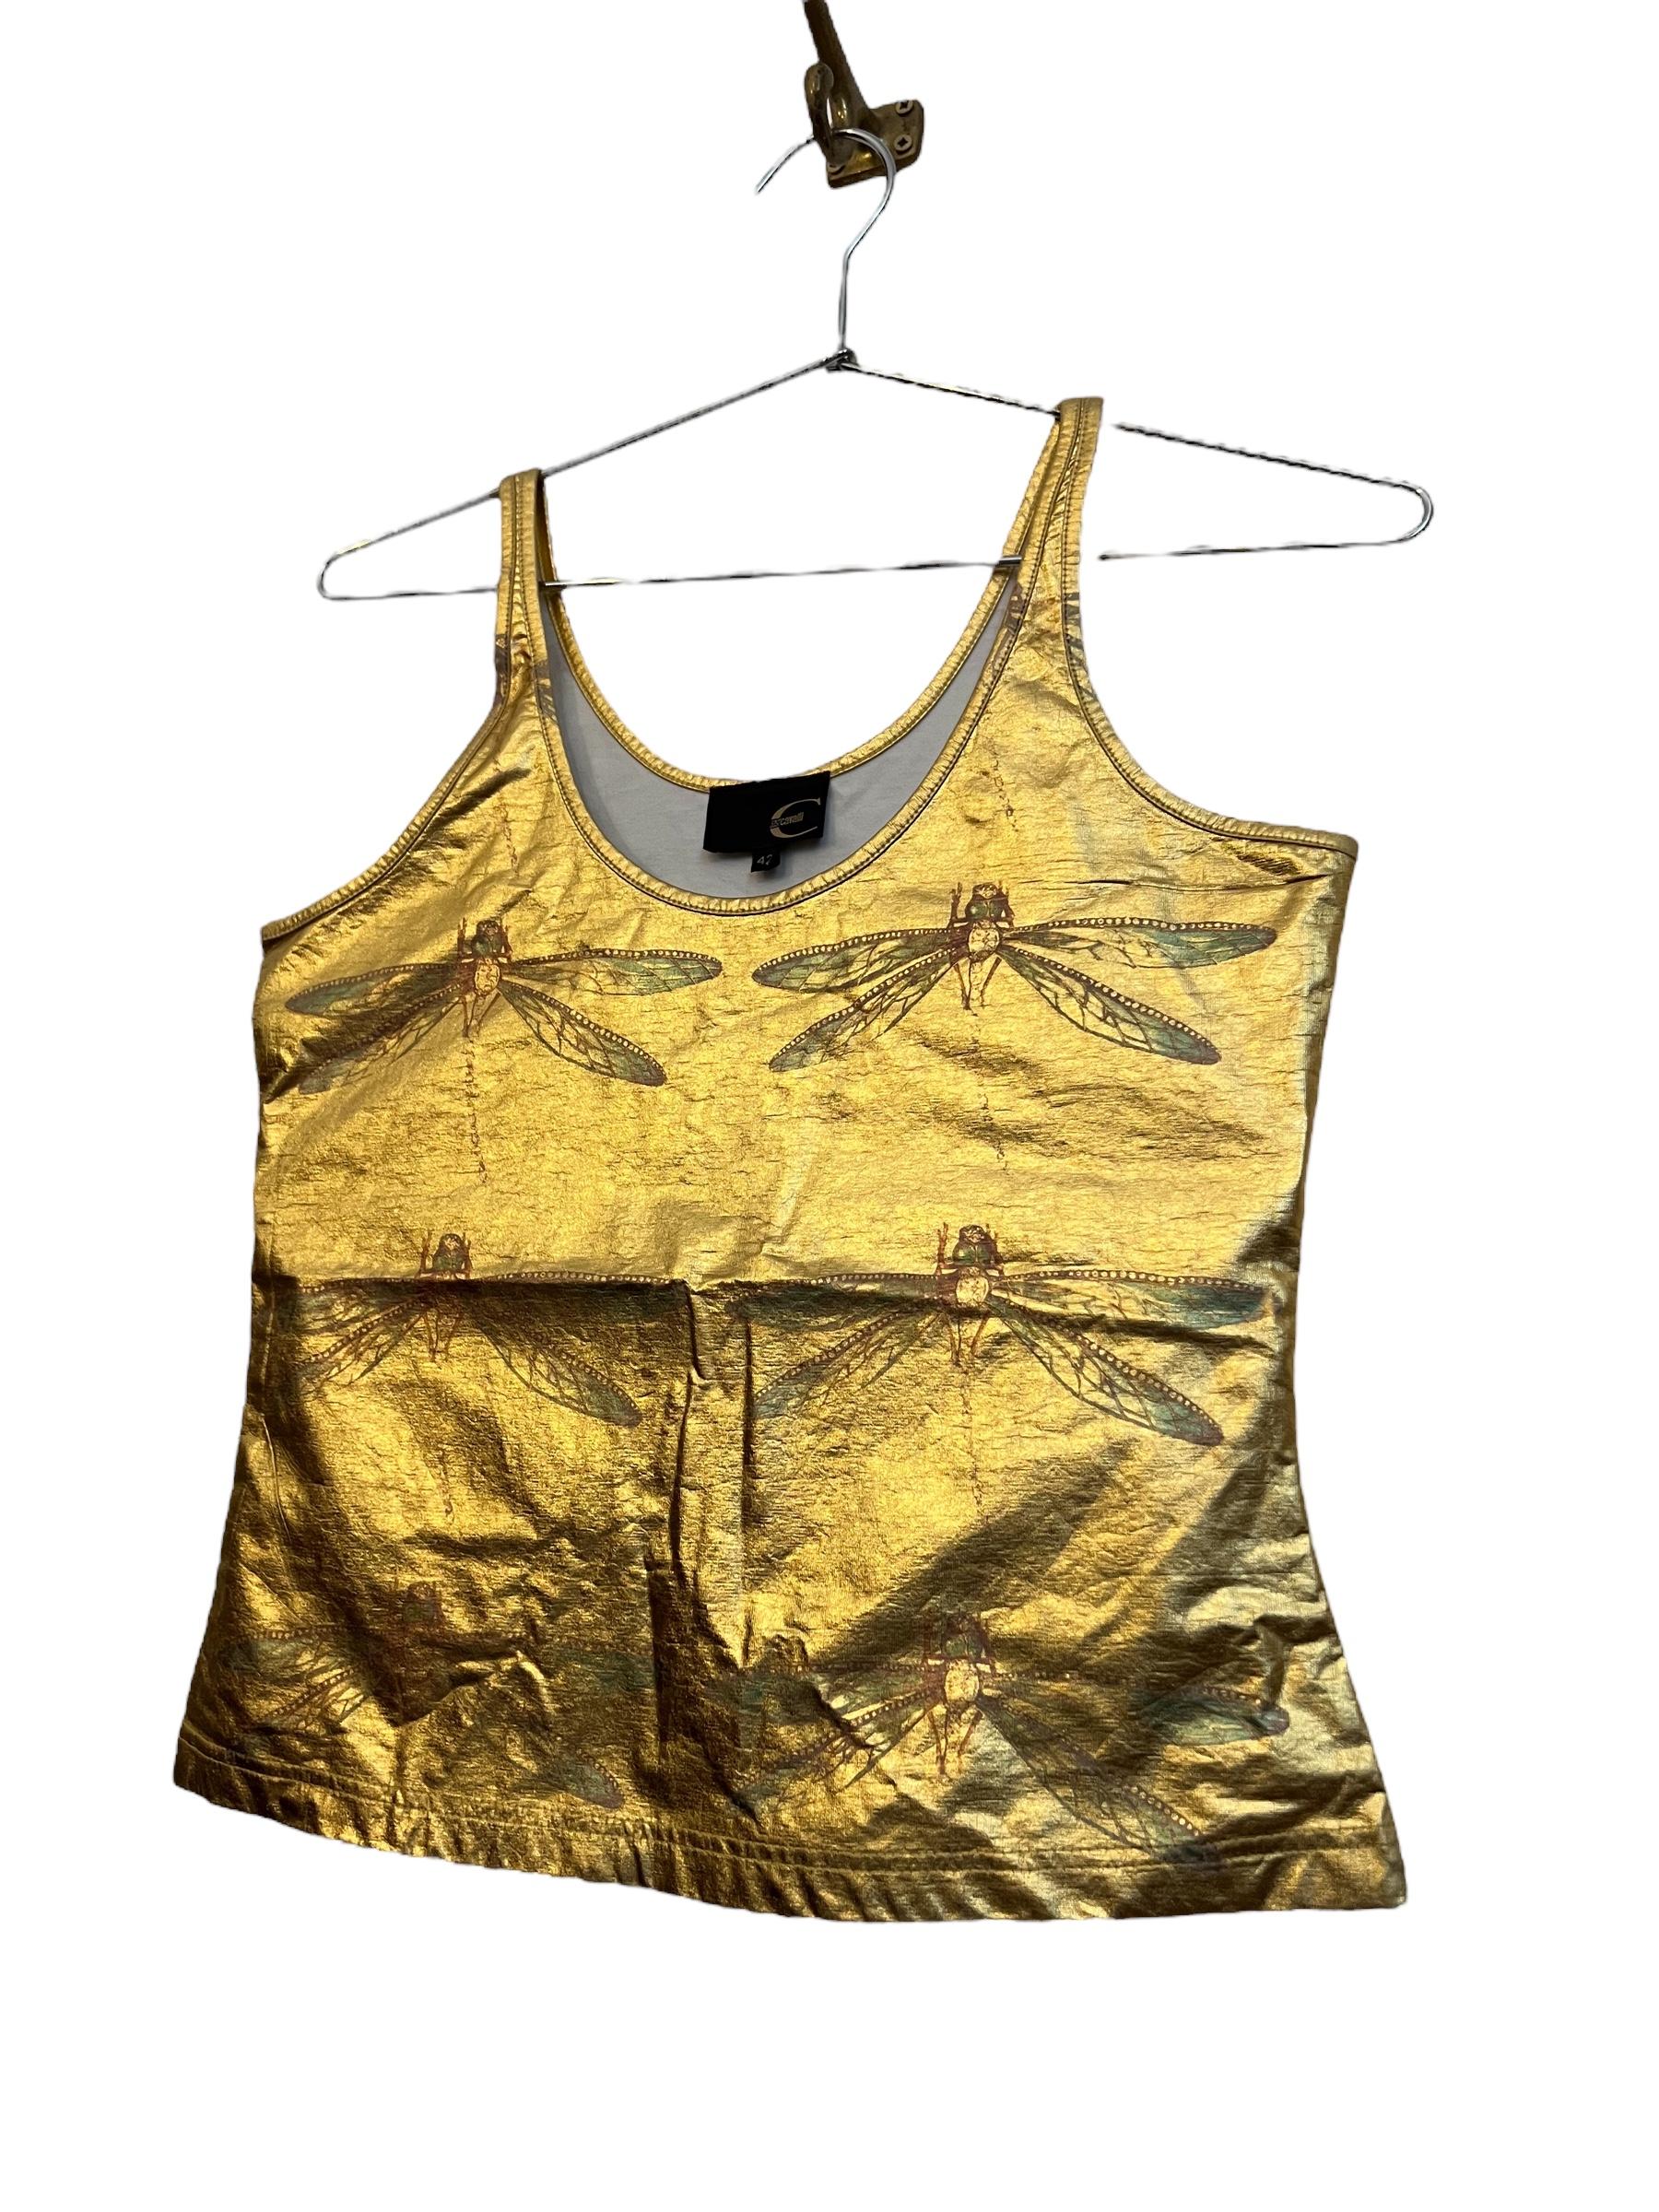 Incredible Y2k era Vintage Roberto Cavalli Tank Top in a Gold lamé material with a beautiful dragonfly Print on the front. 

MADE IN ITALY

Features:
Scoop neckline
Strappy shoulders

95% Cotton
5% Spandex

Sizing: 
Pit to Pit: 216